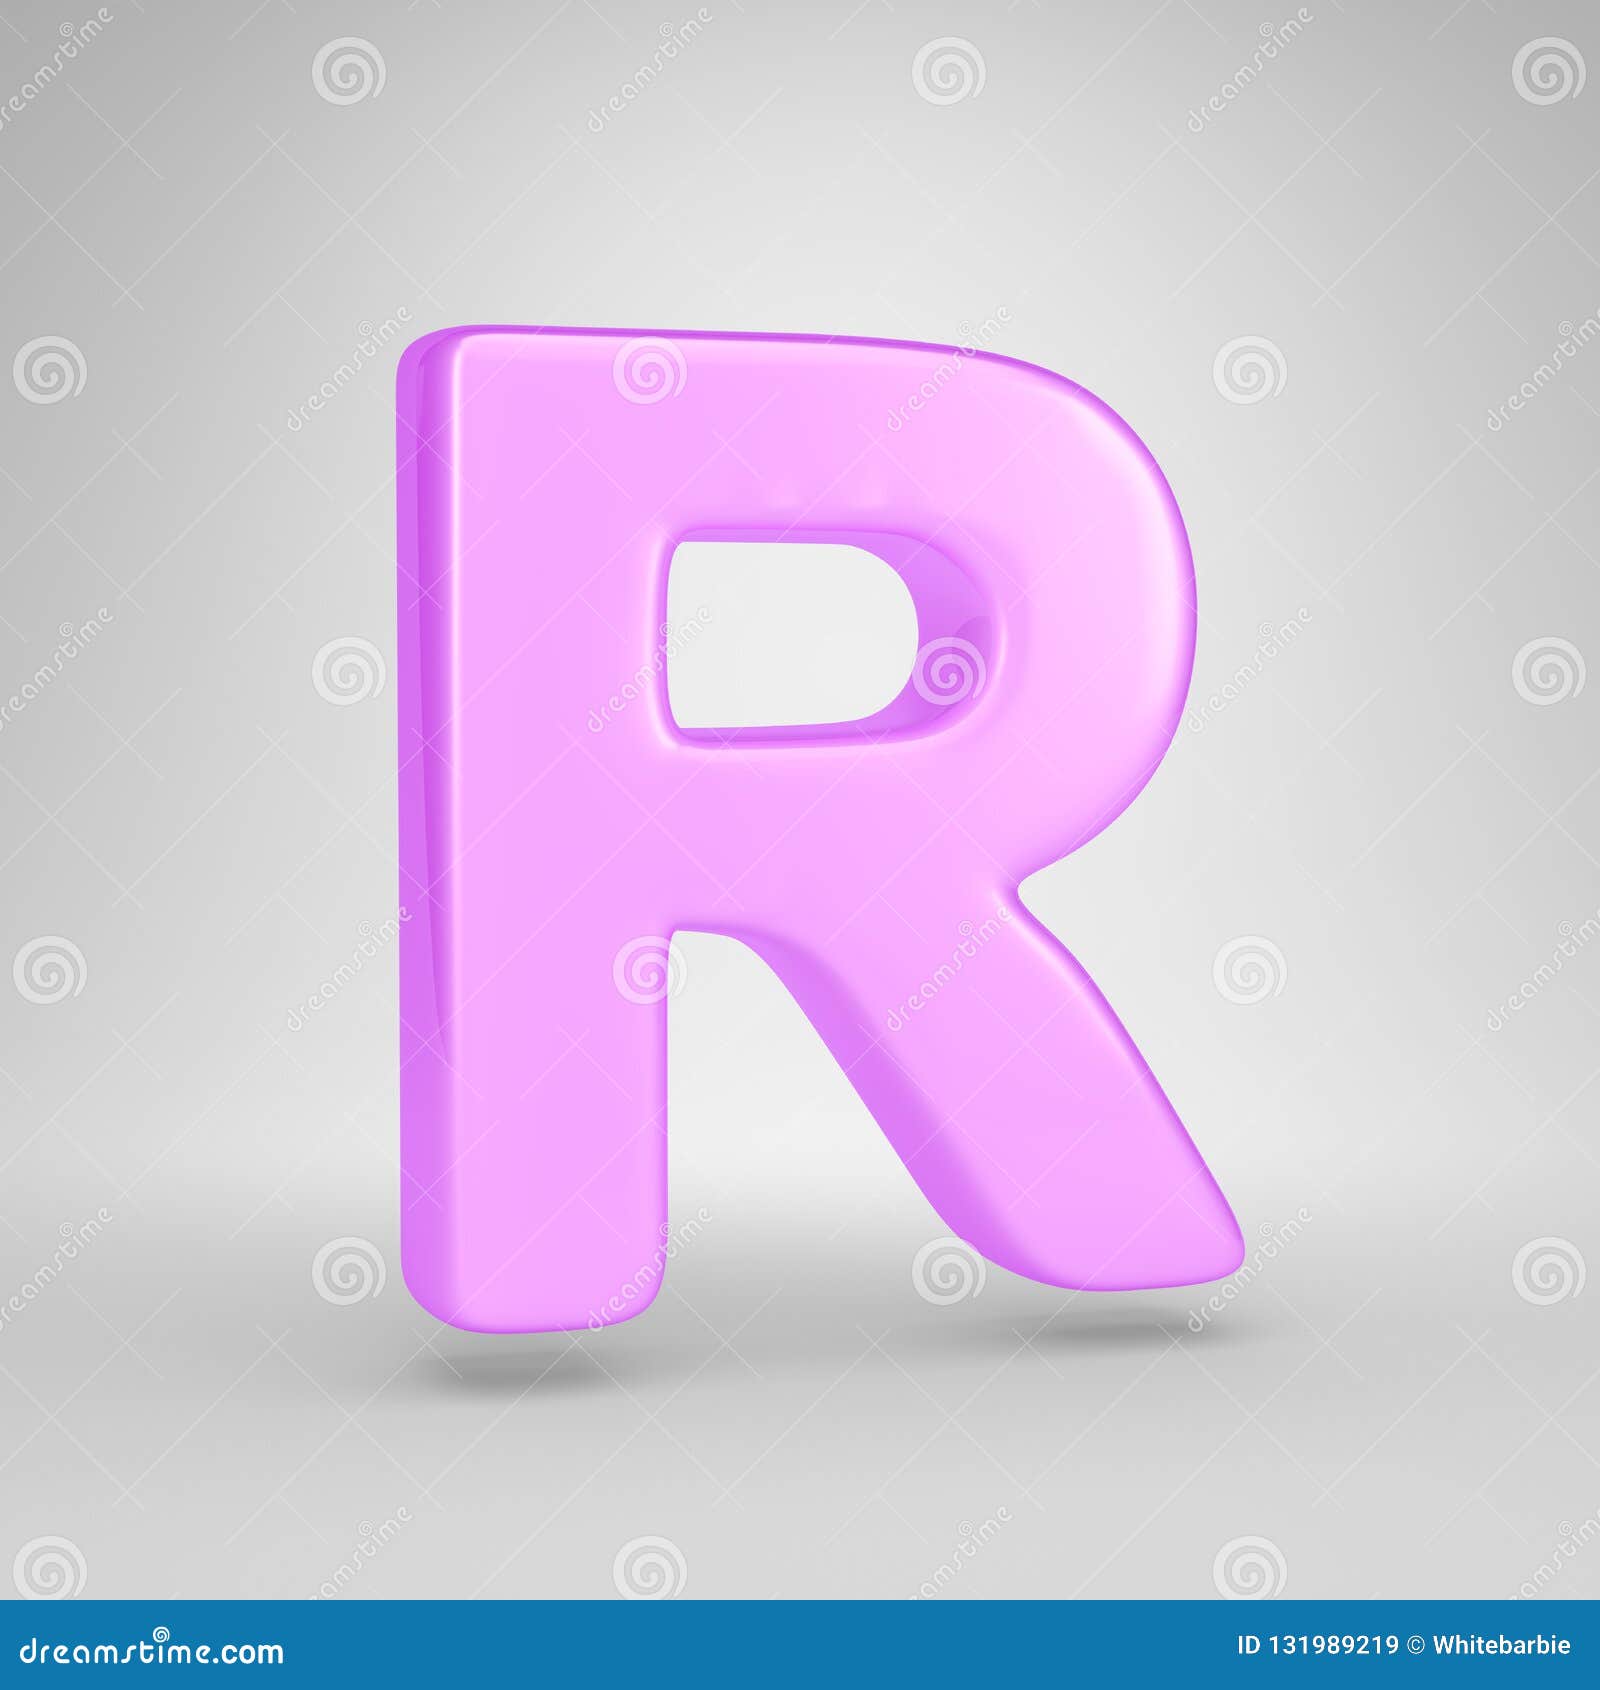 Glossy Pink Bubble Gum Letter R Uppercase Isolated on White Background ...